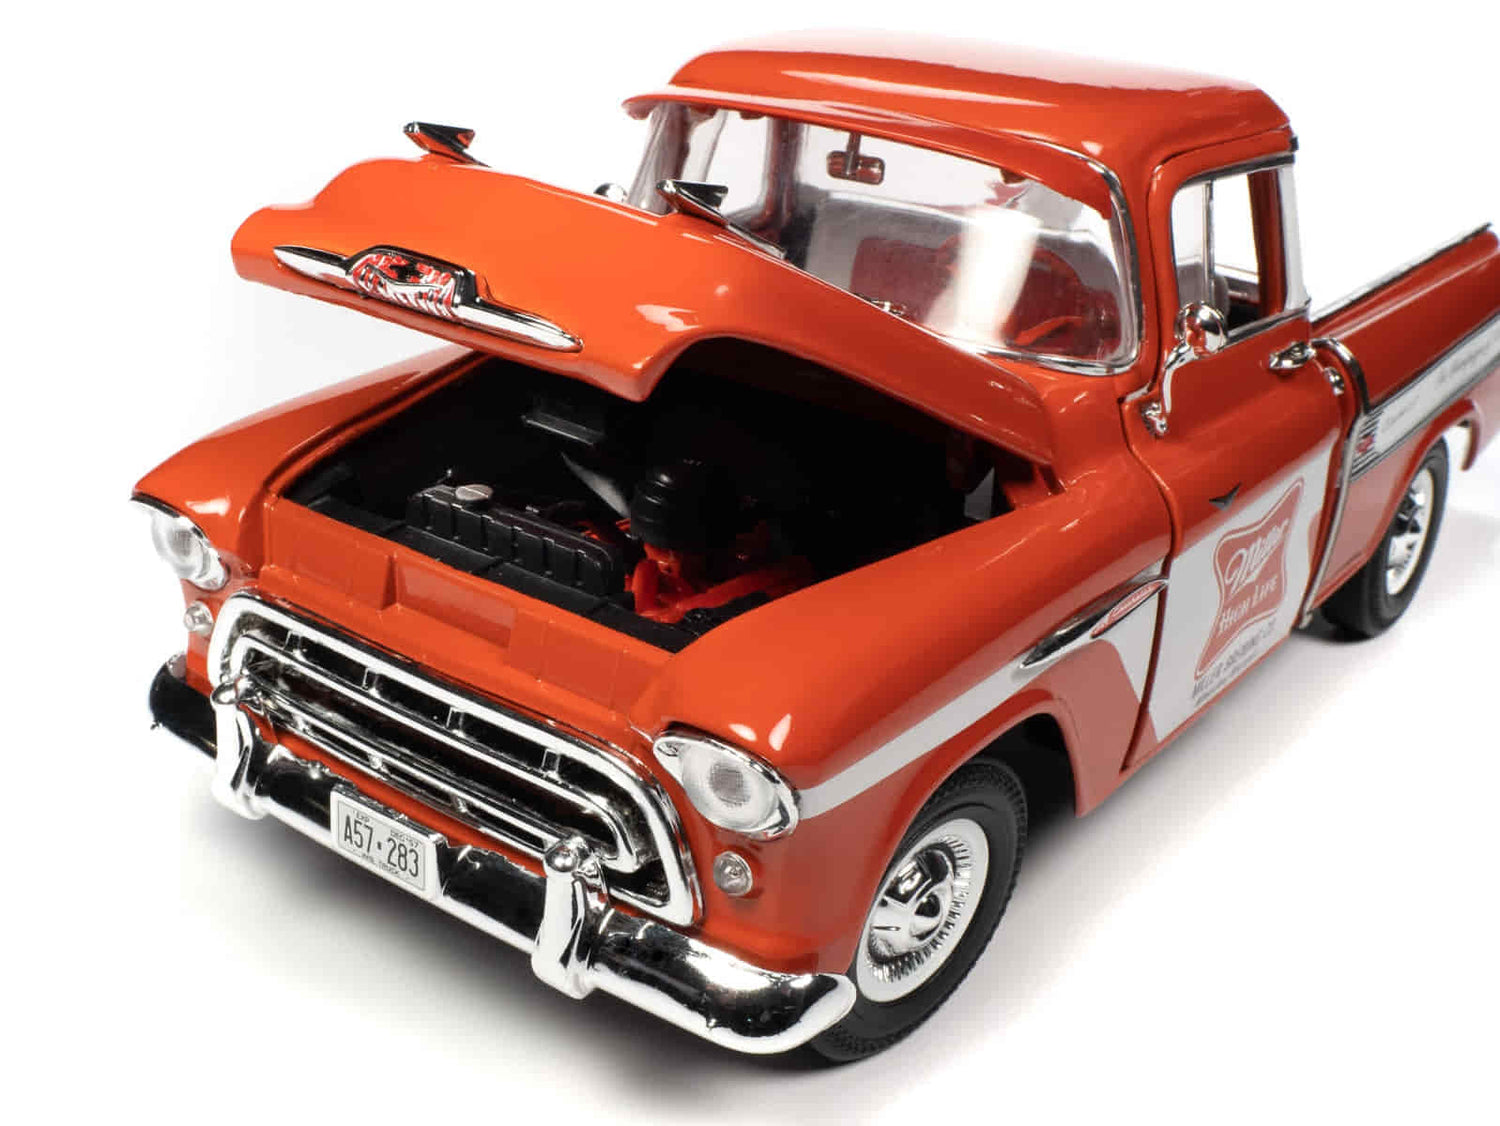 Auto World 1957 Chevy Cameo Pickup Miller High Life 1:18 Scale Diecast